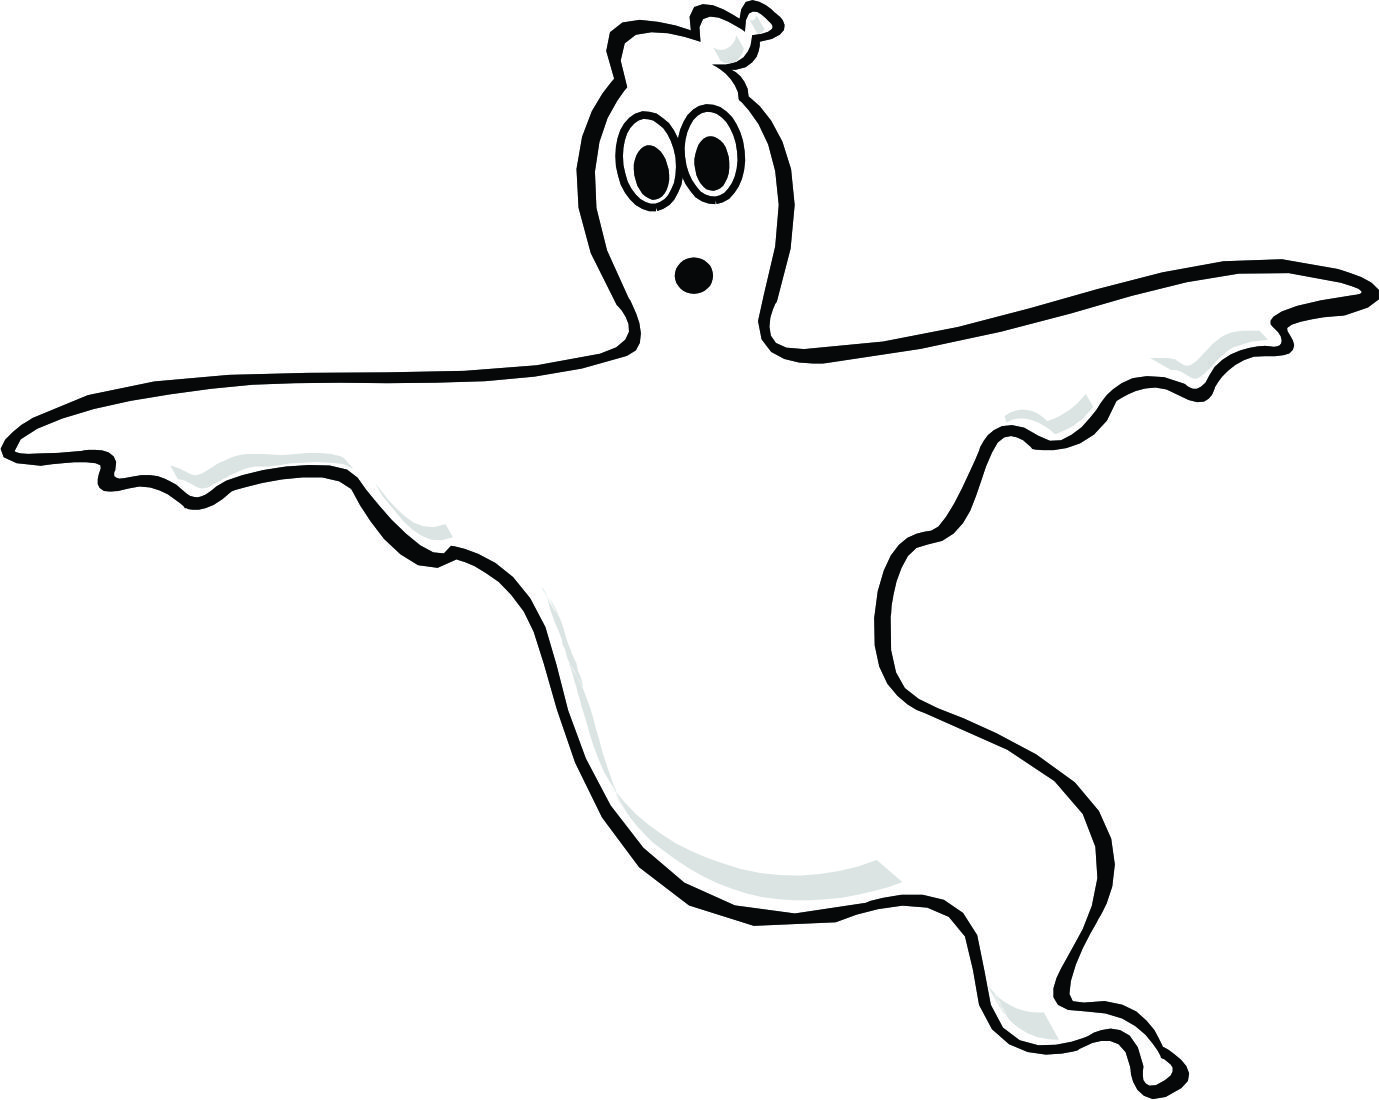 free black and white ghost clipart - photo #44